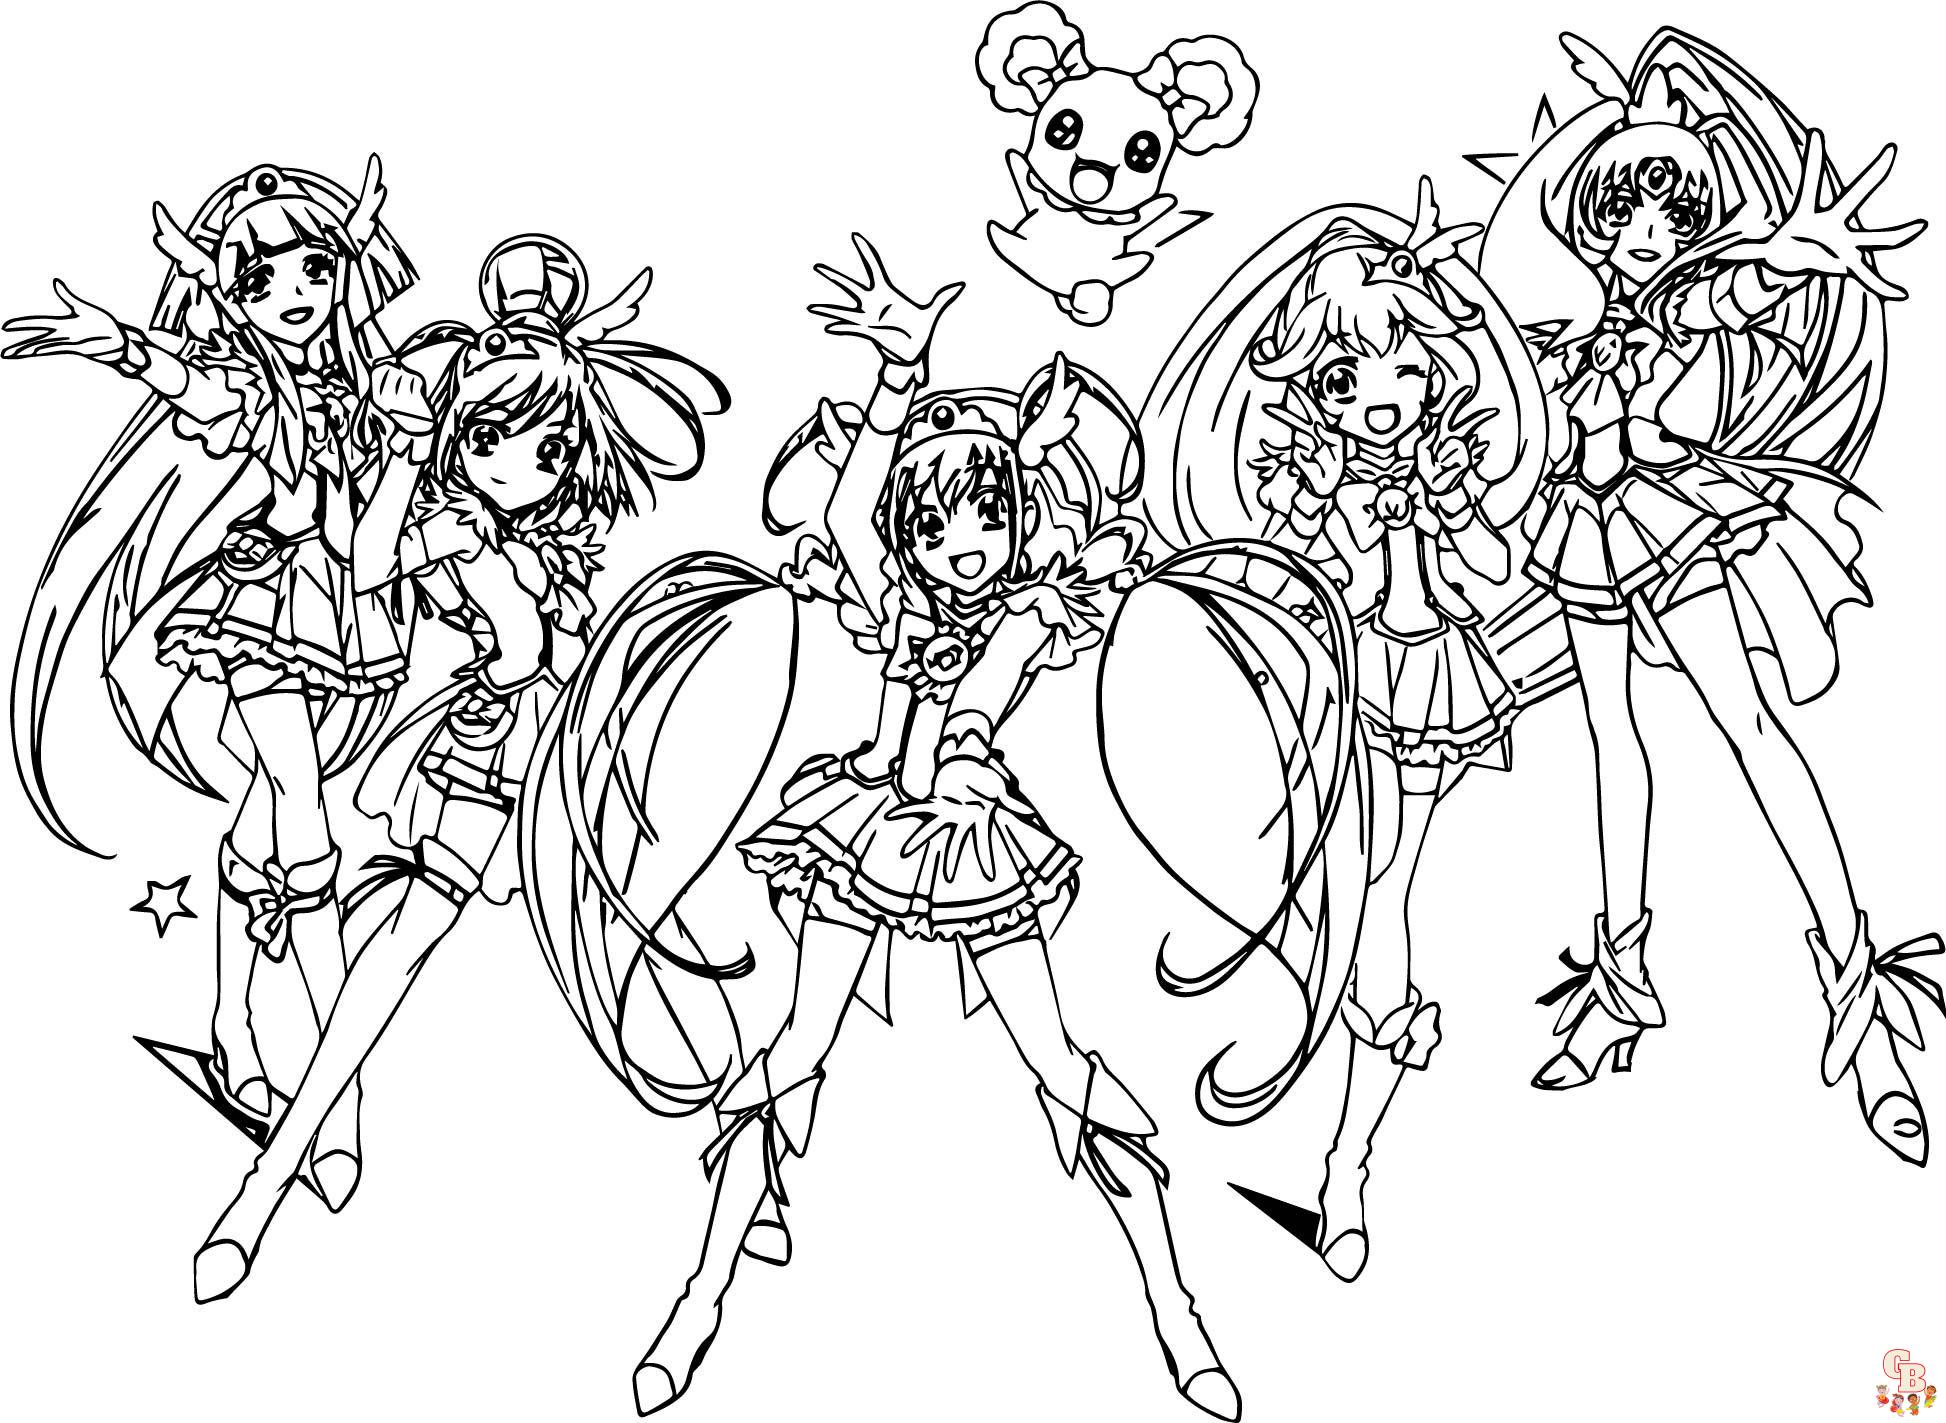 Glitter Force Printable coloring page - Download, Print or Color